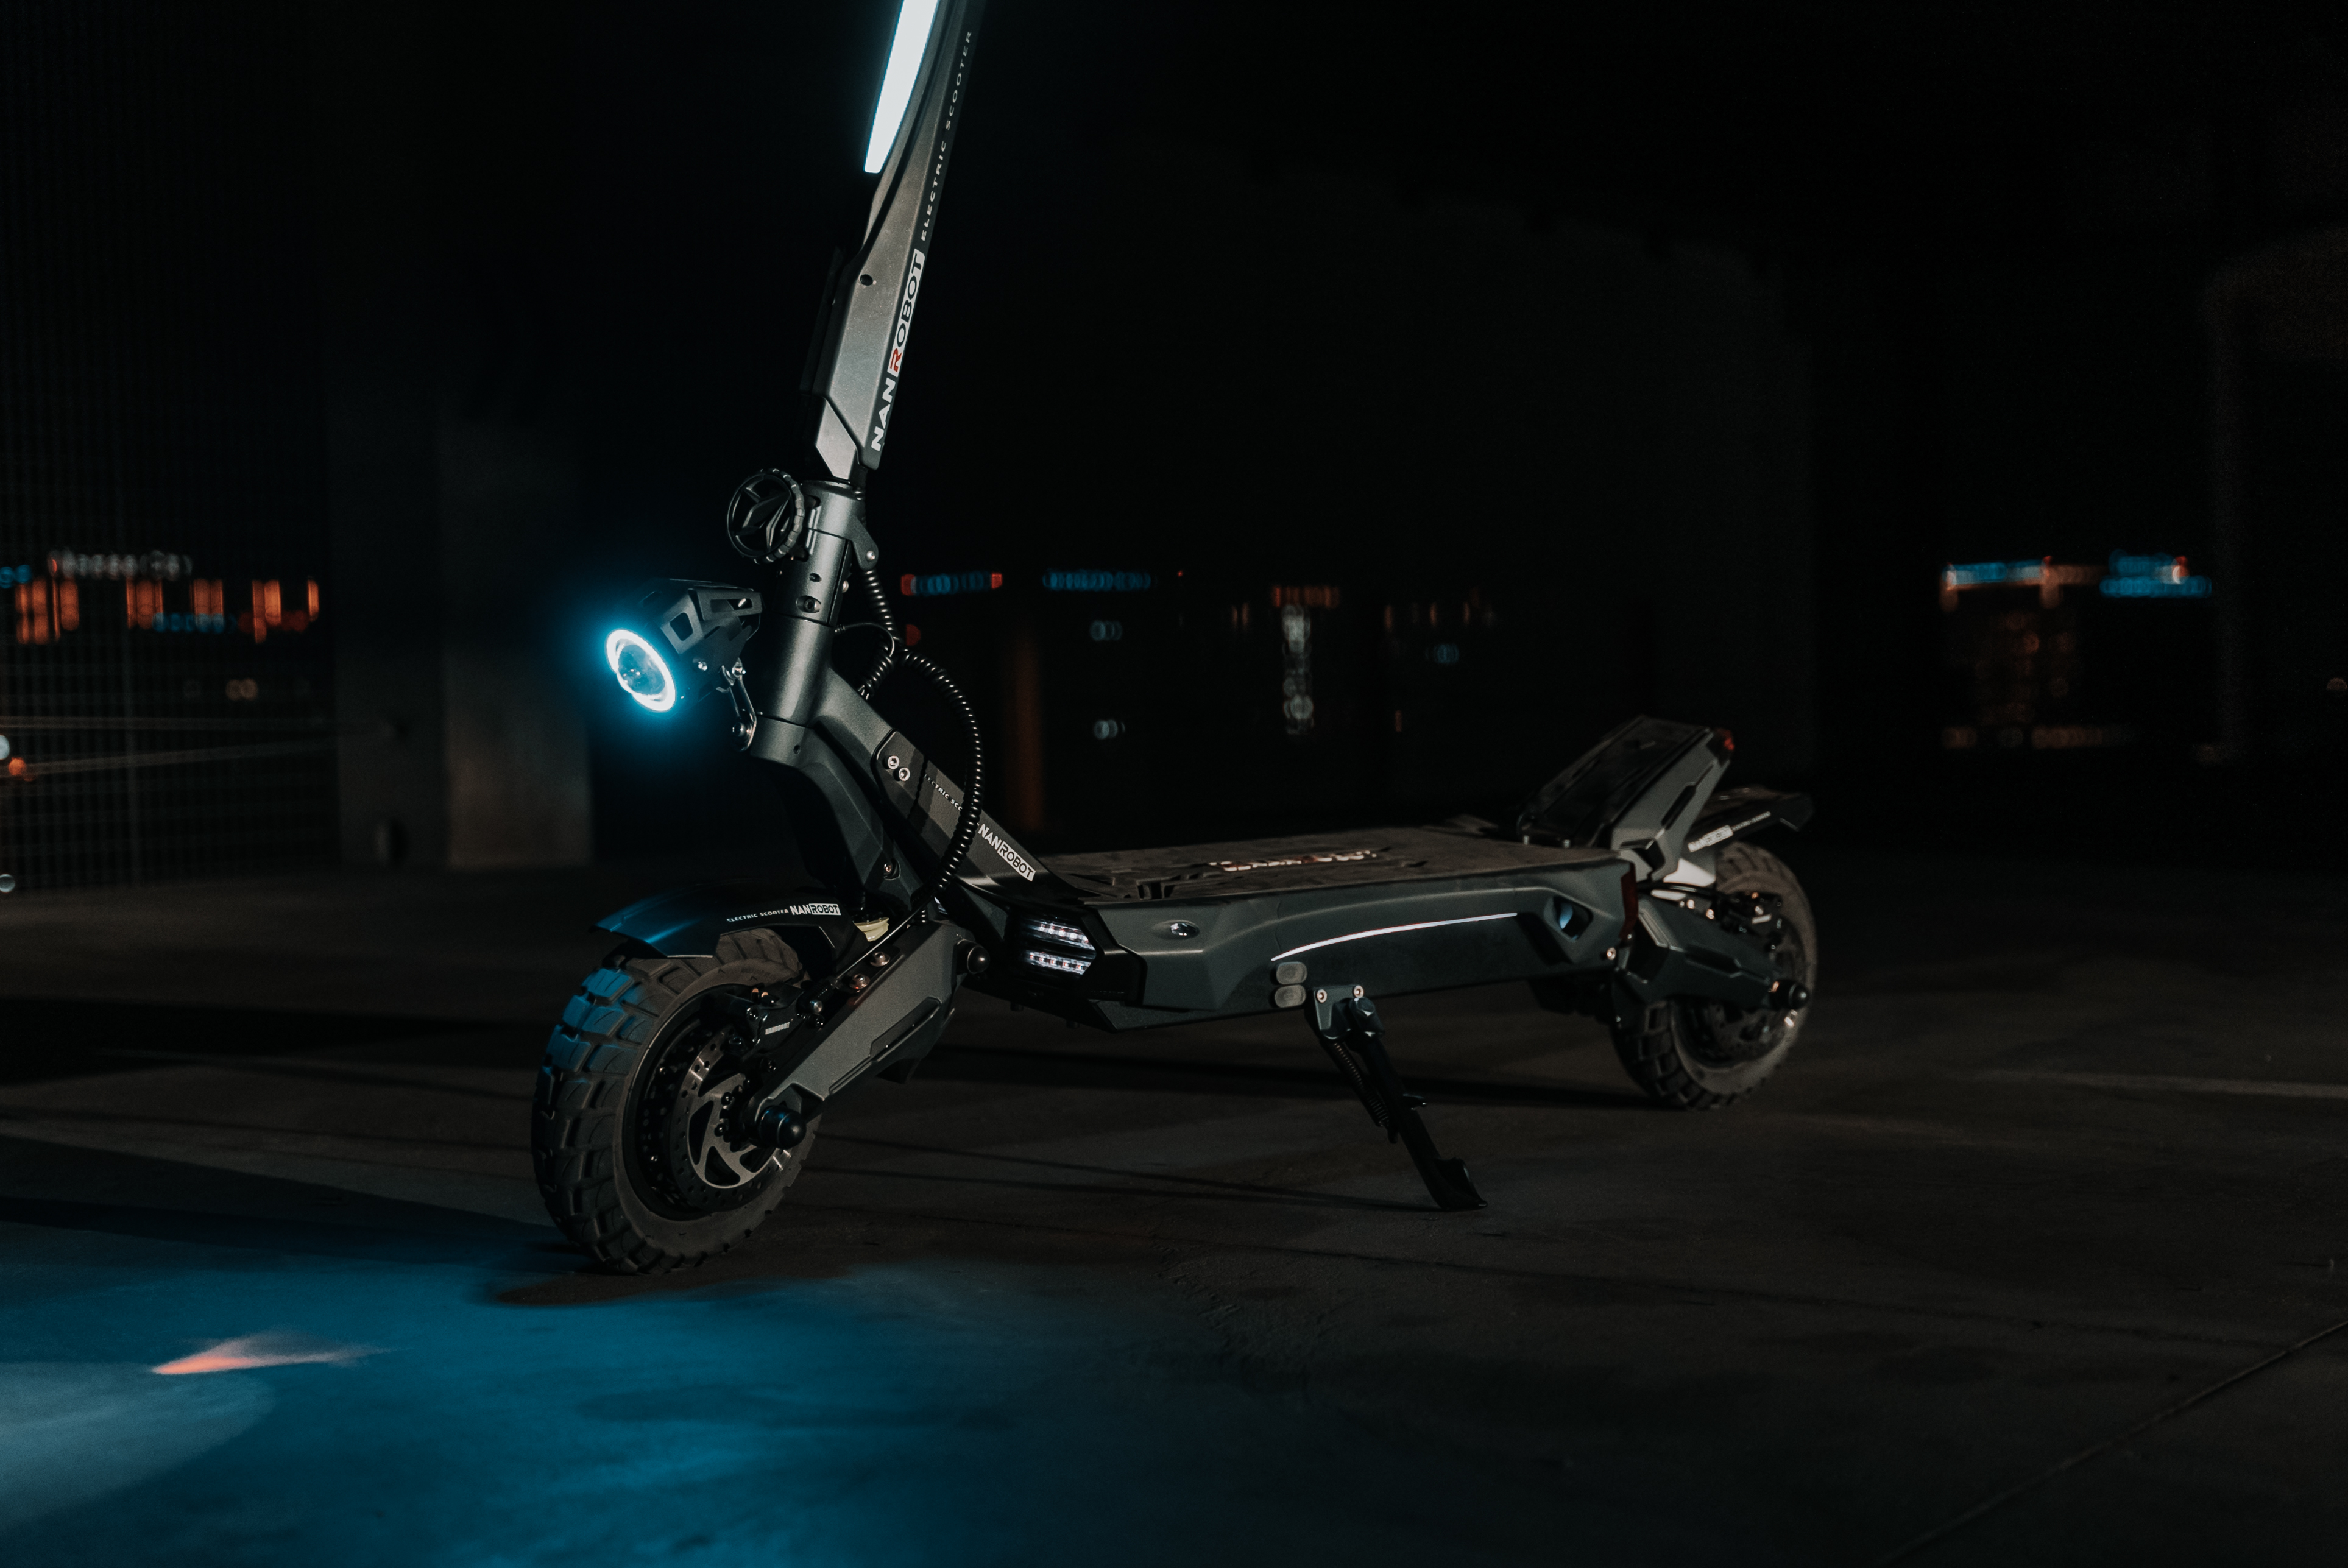 IONEX S7 ABS, an electric scooter for the urban jungle